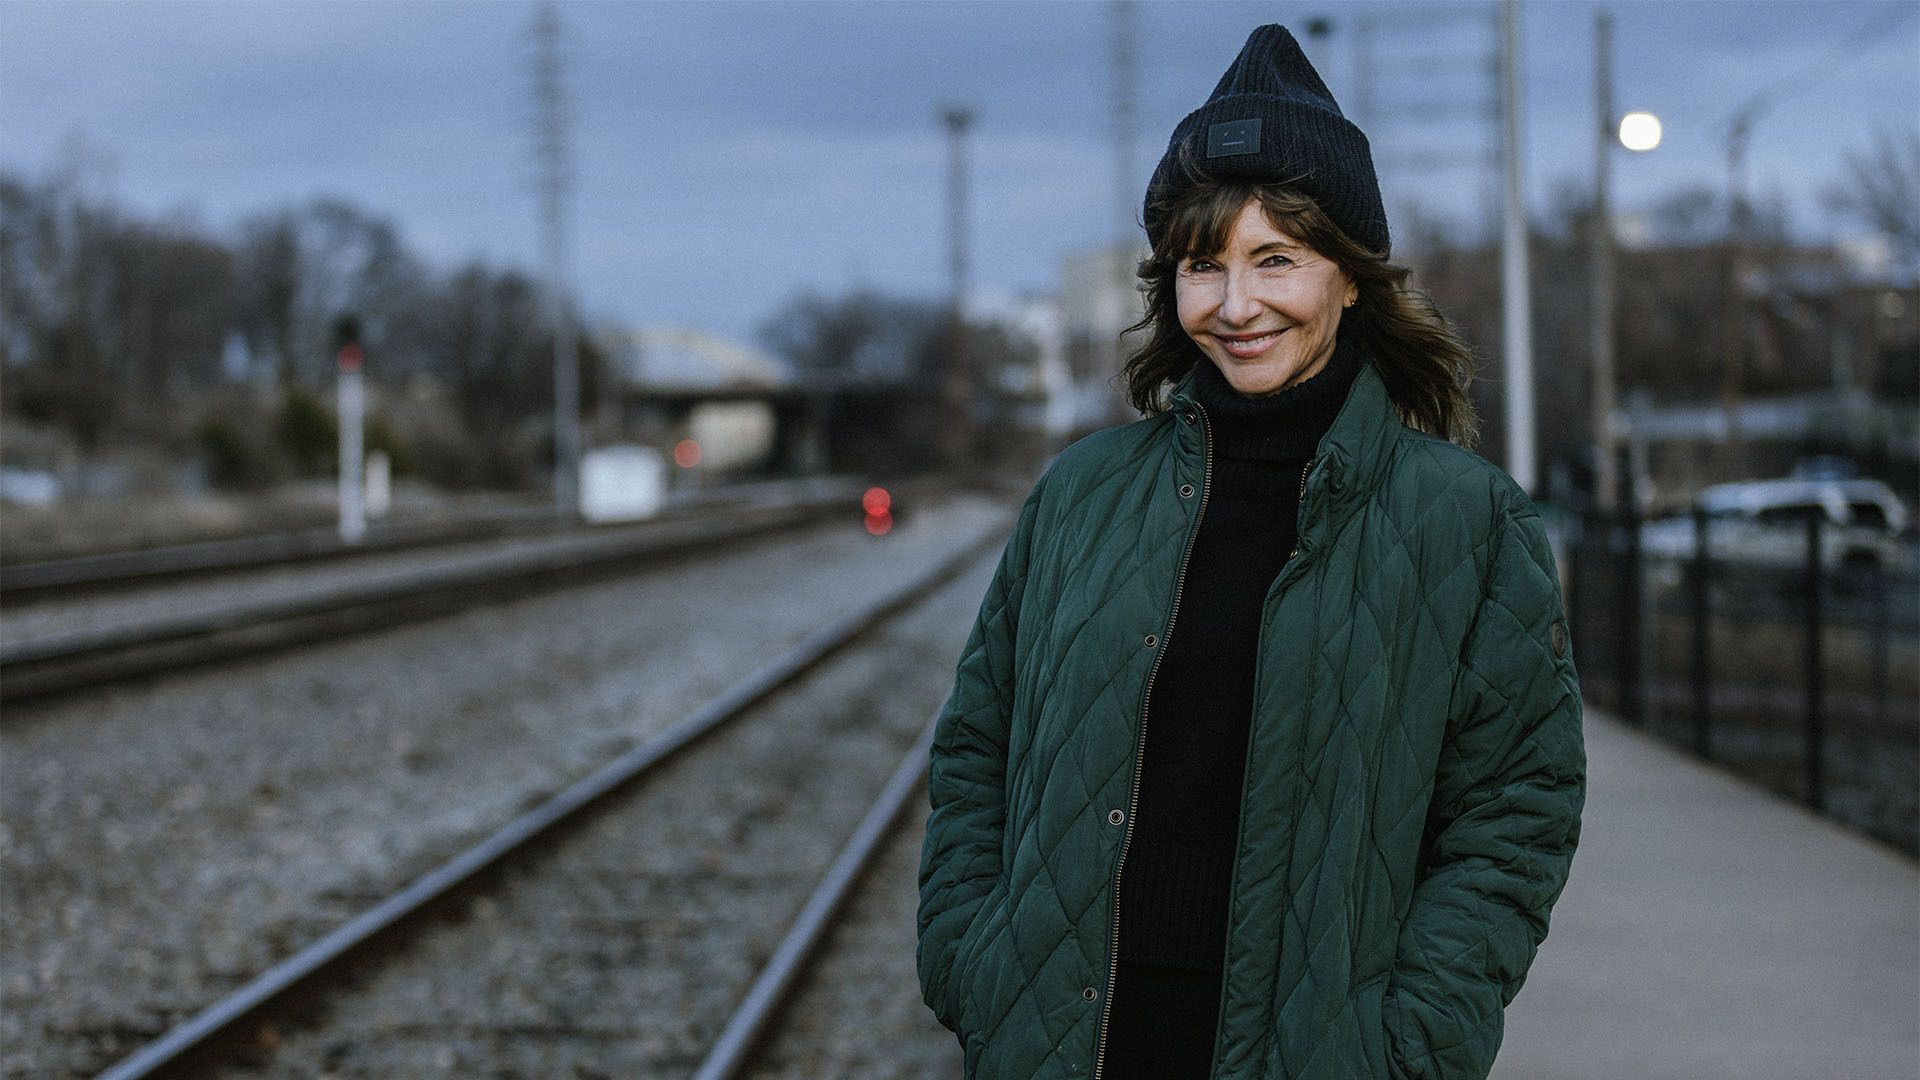 Mary Steenburgen visits the train station in Little Rock, Arkansas where her father was a trainman.